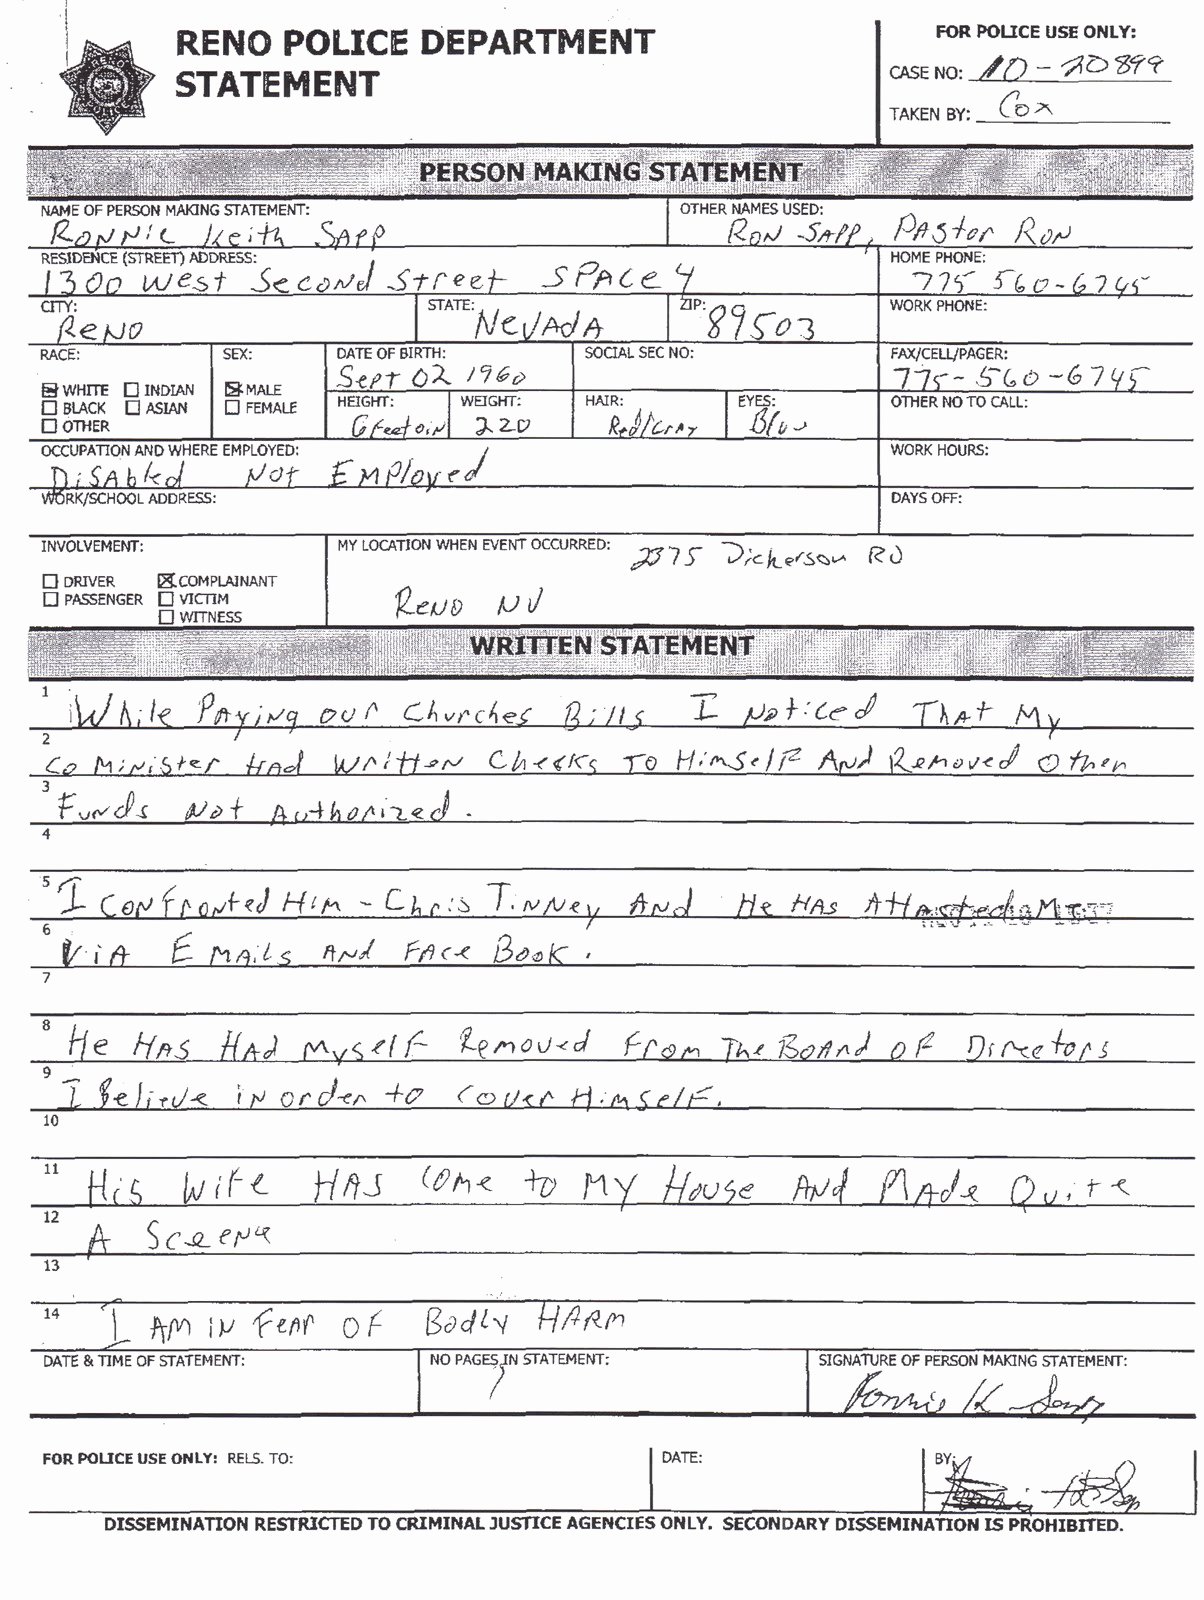 Blank Police Report Template Inspirational Blank Police Report Template Free Police Report Template